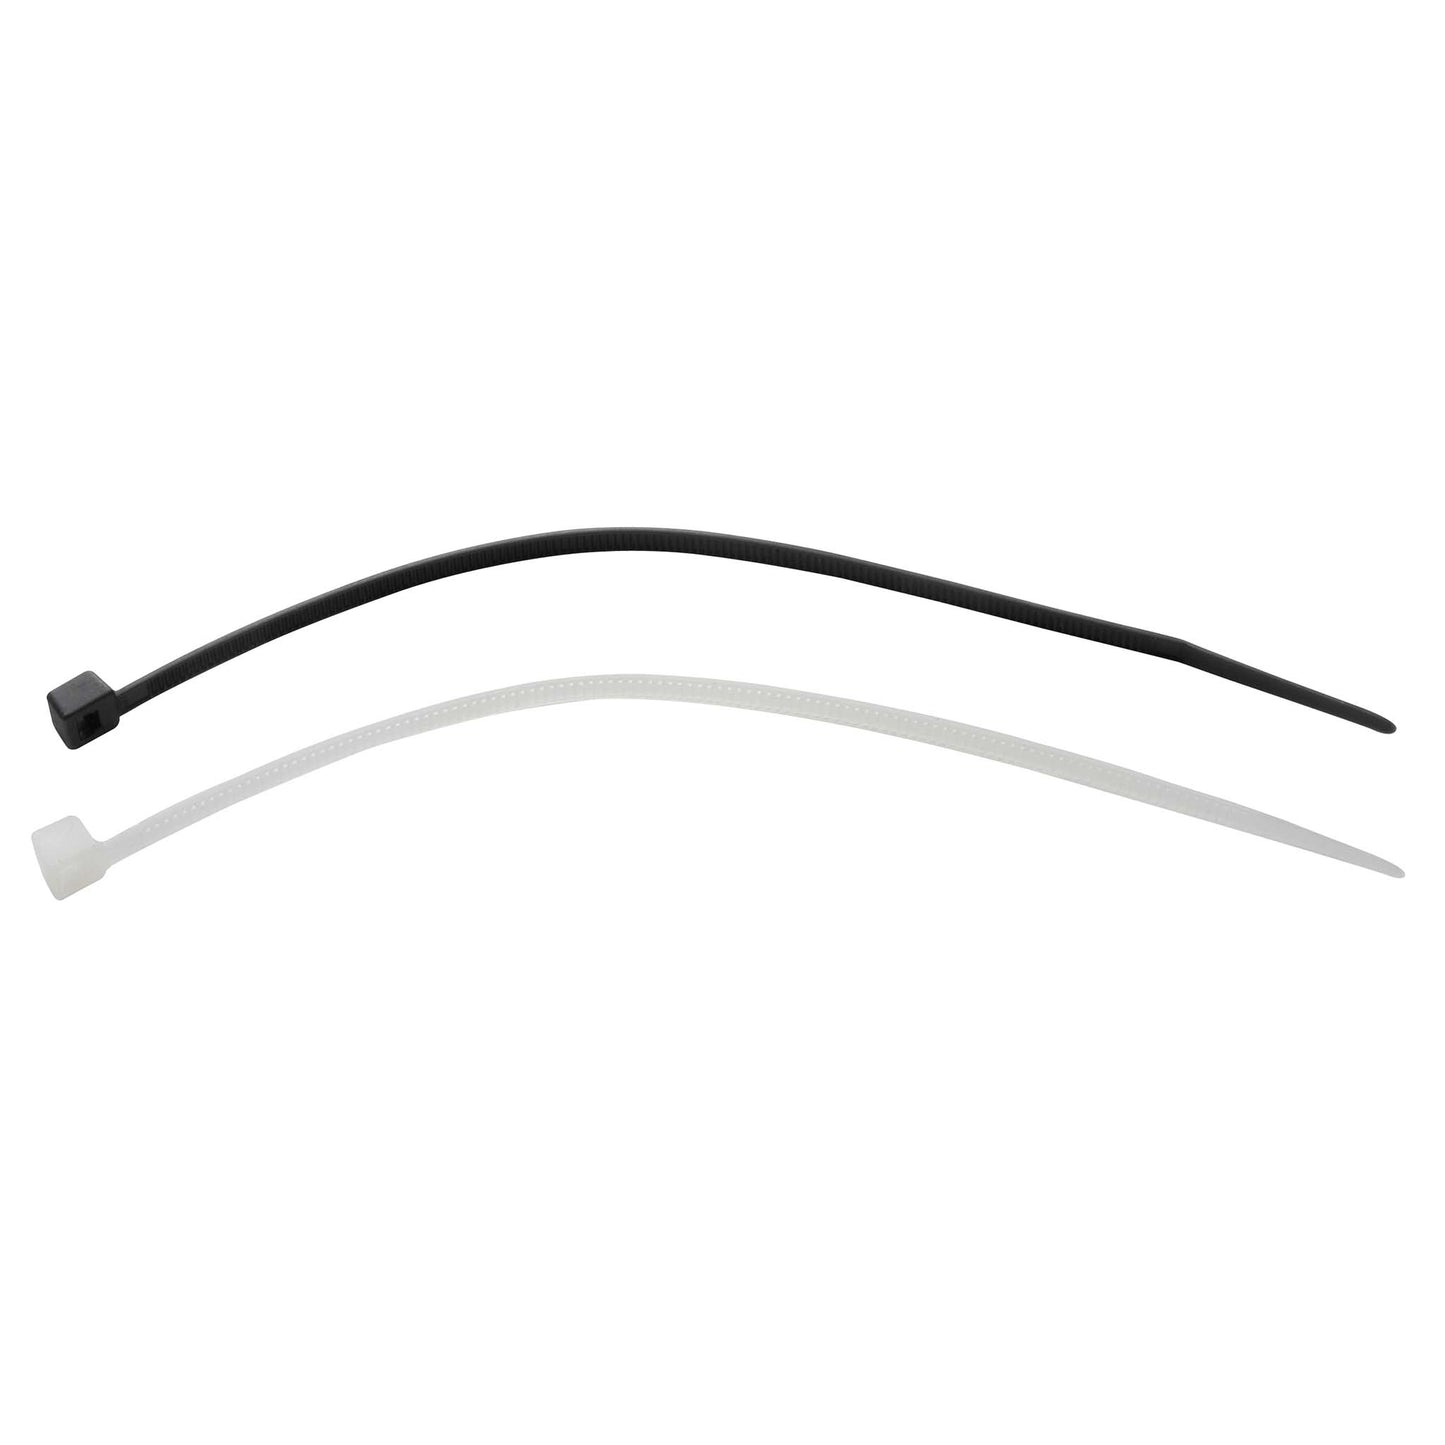 Cable ties 140 x 3.5 mm - black